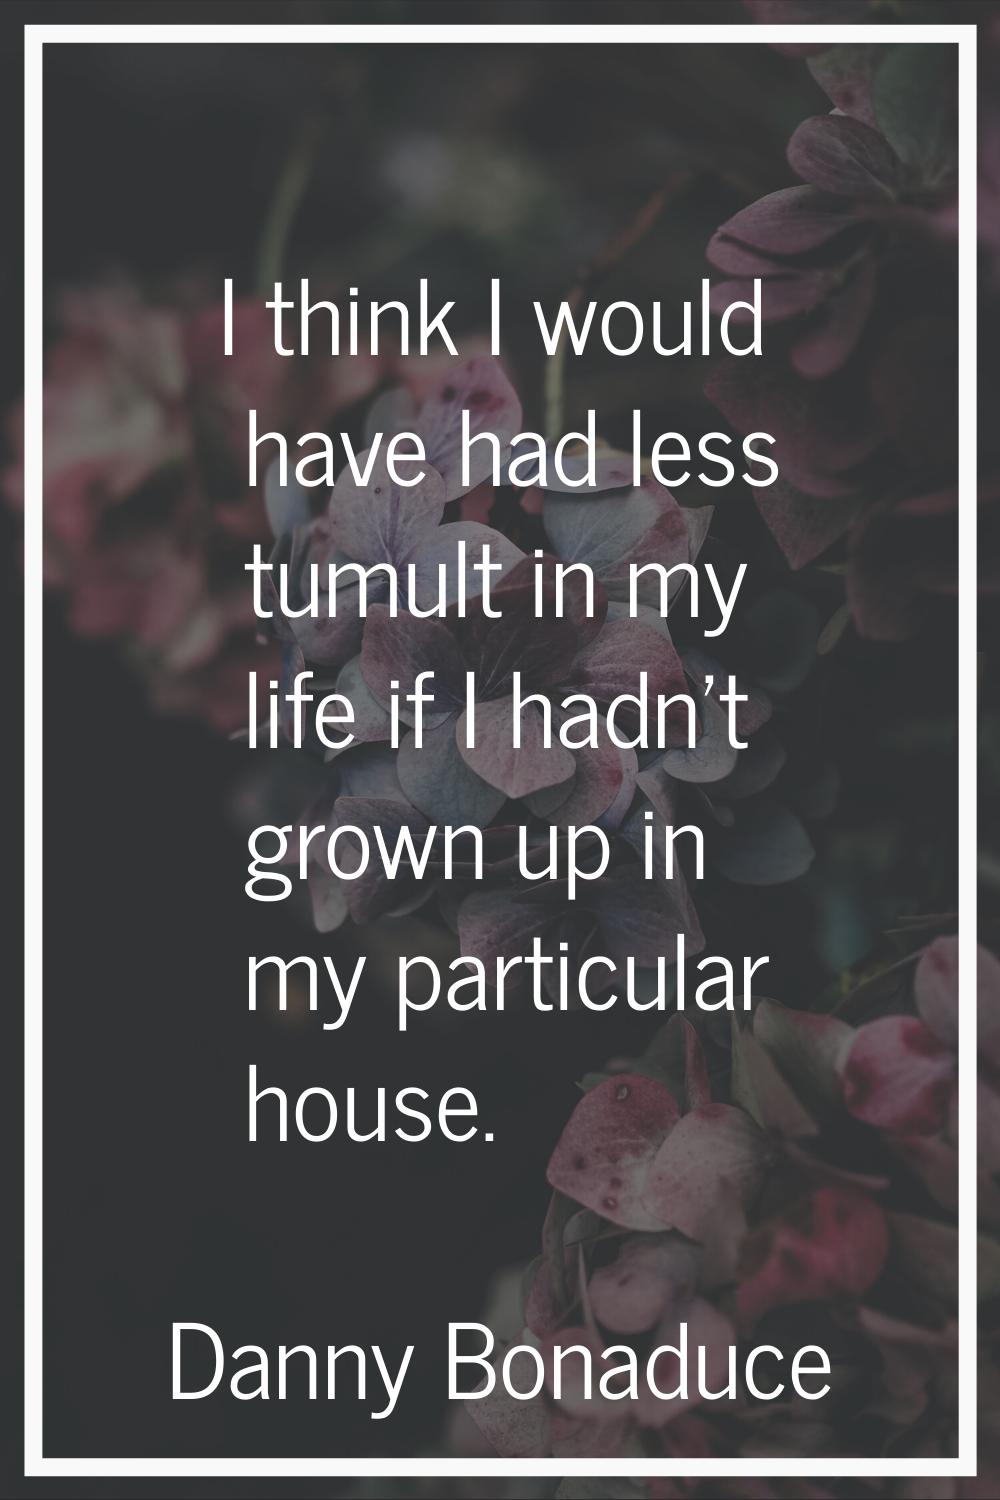 I think I would have had less tumult in my life if I hadn't grown up in my particular house.